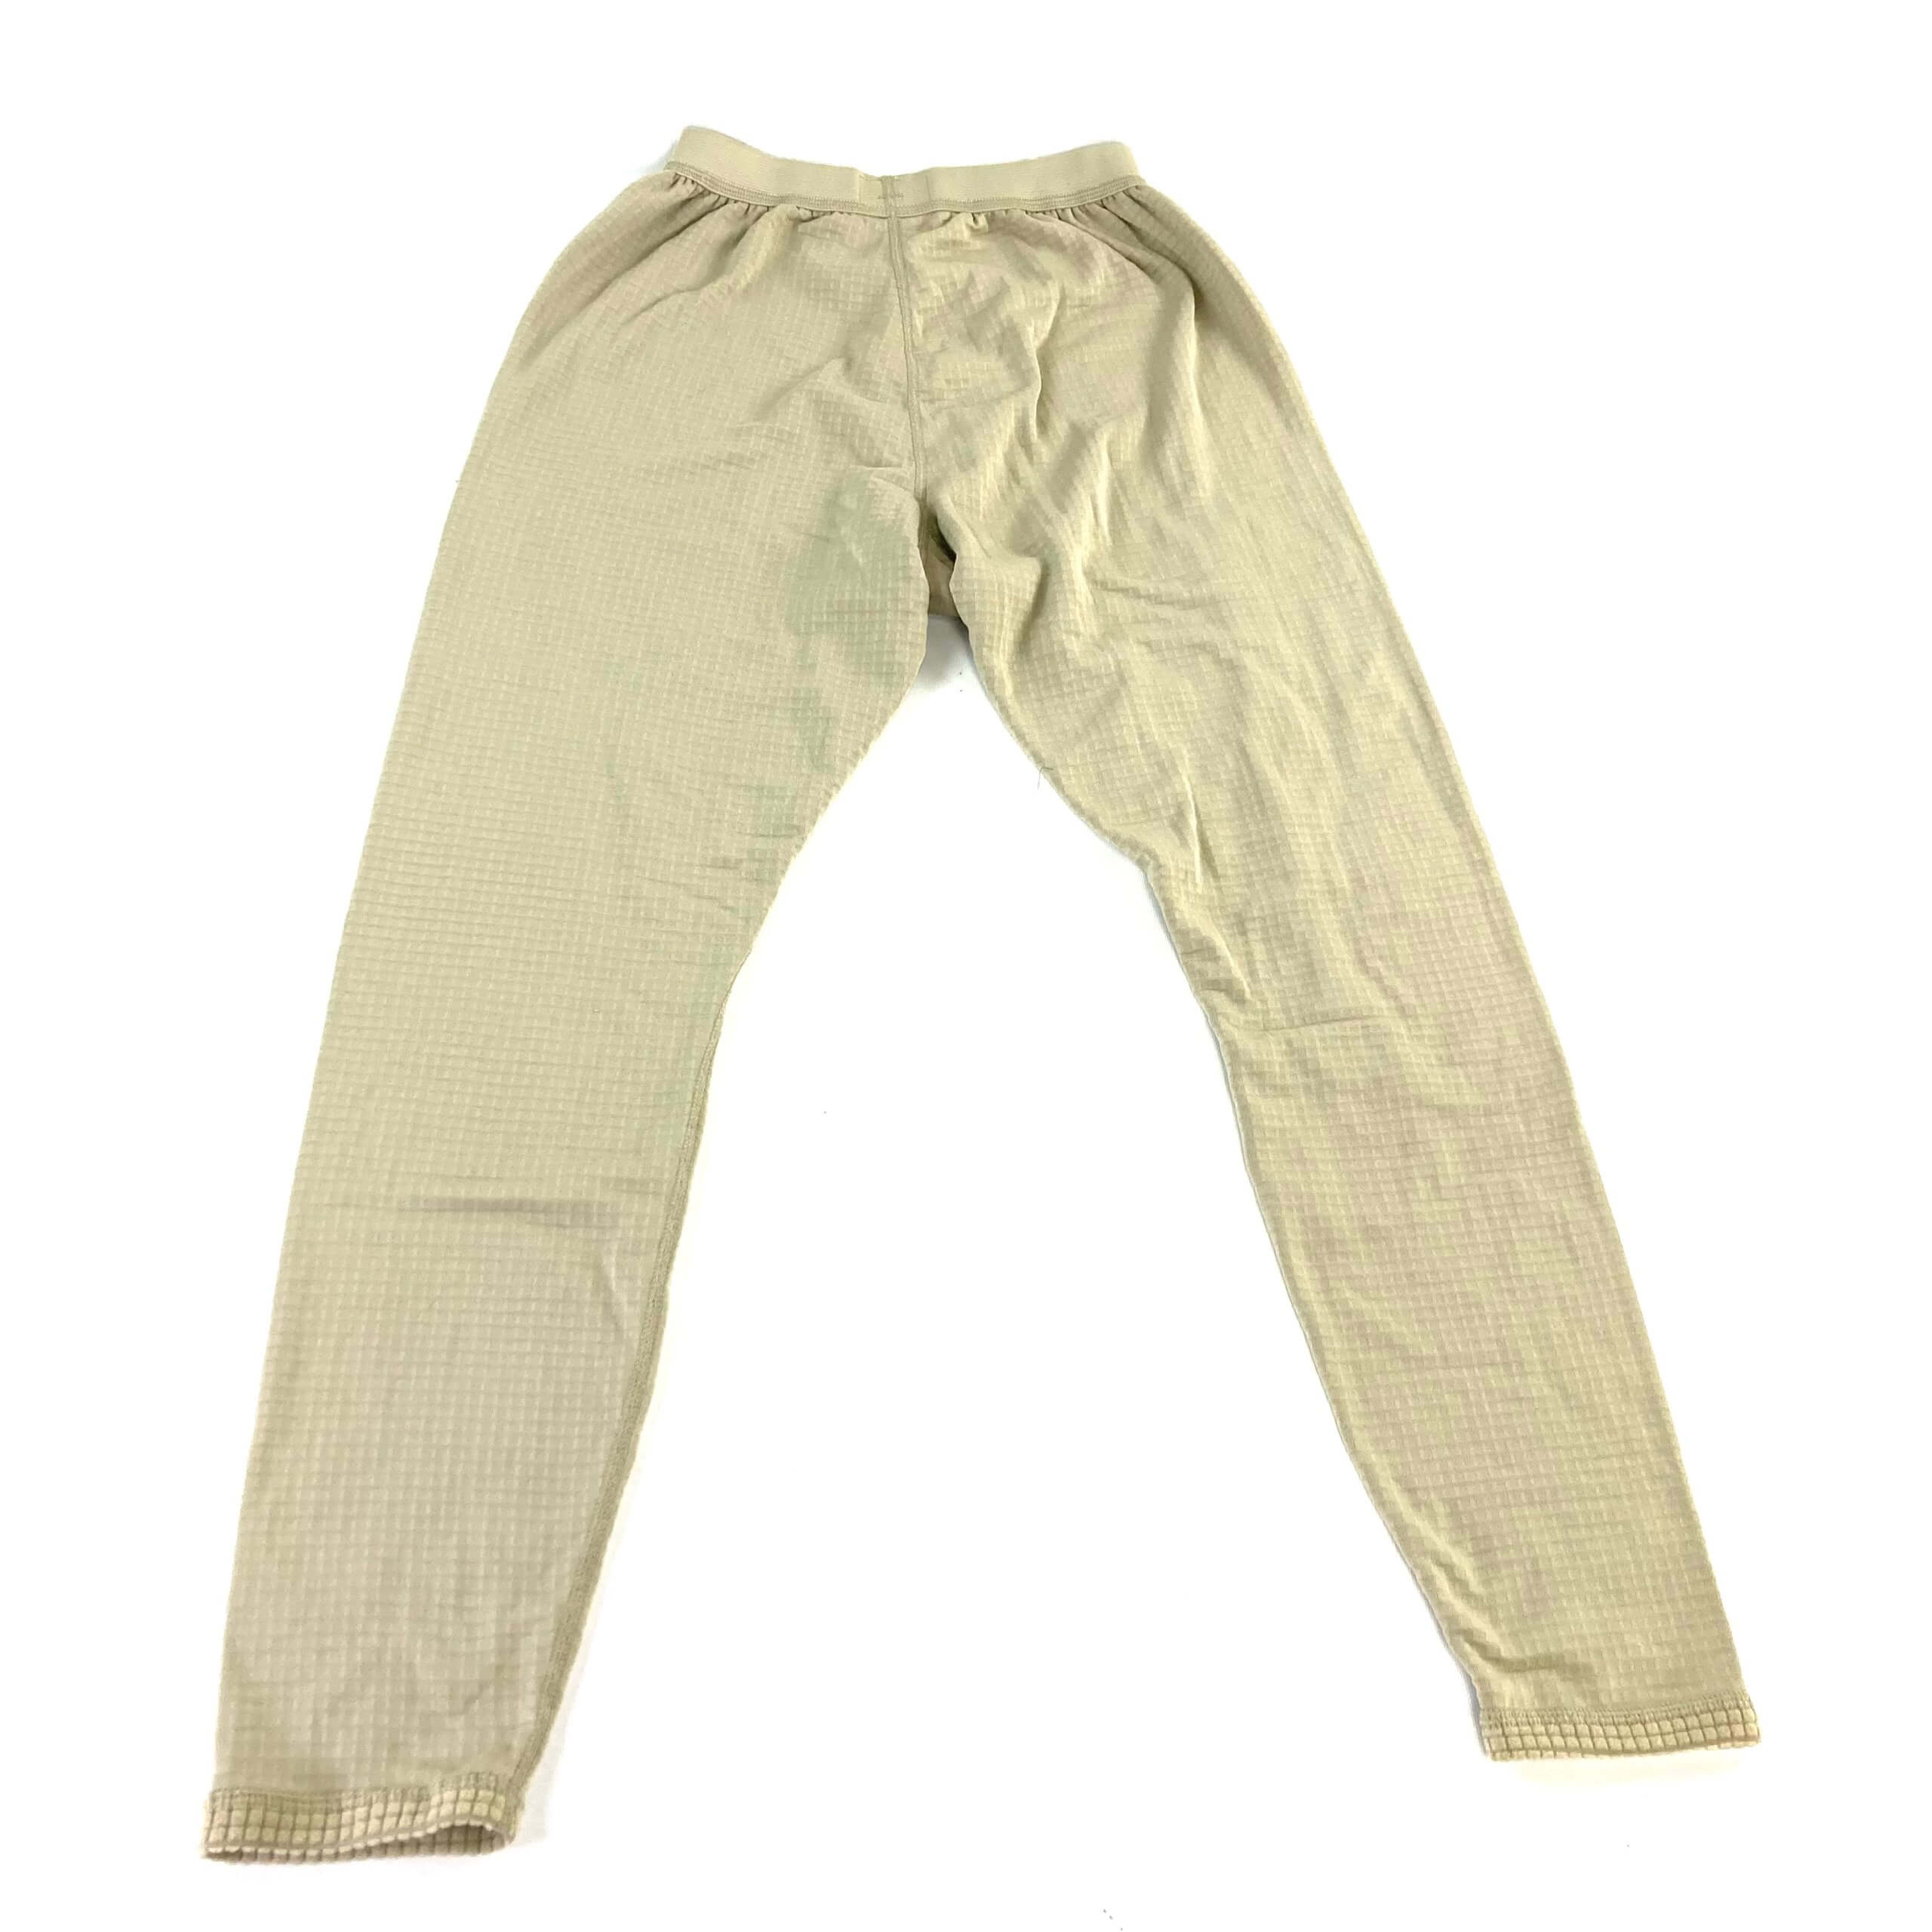 US Army Level 2 Thermal Pants, Sand Tan